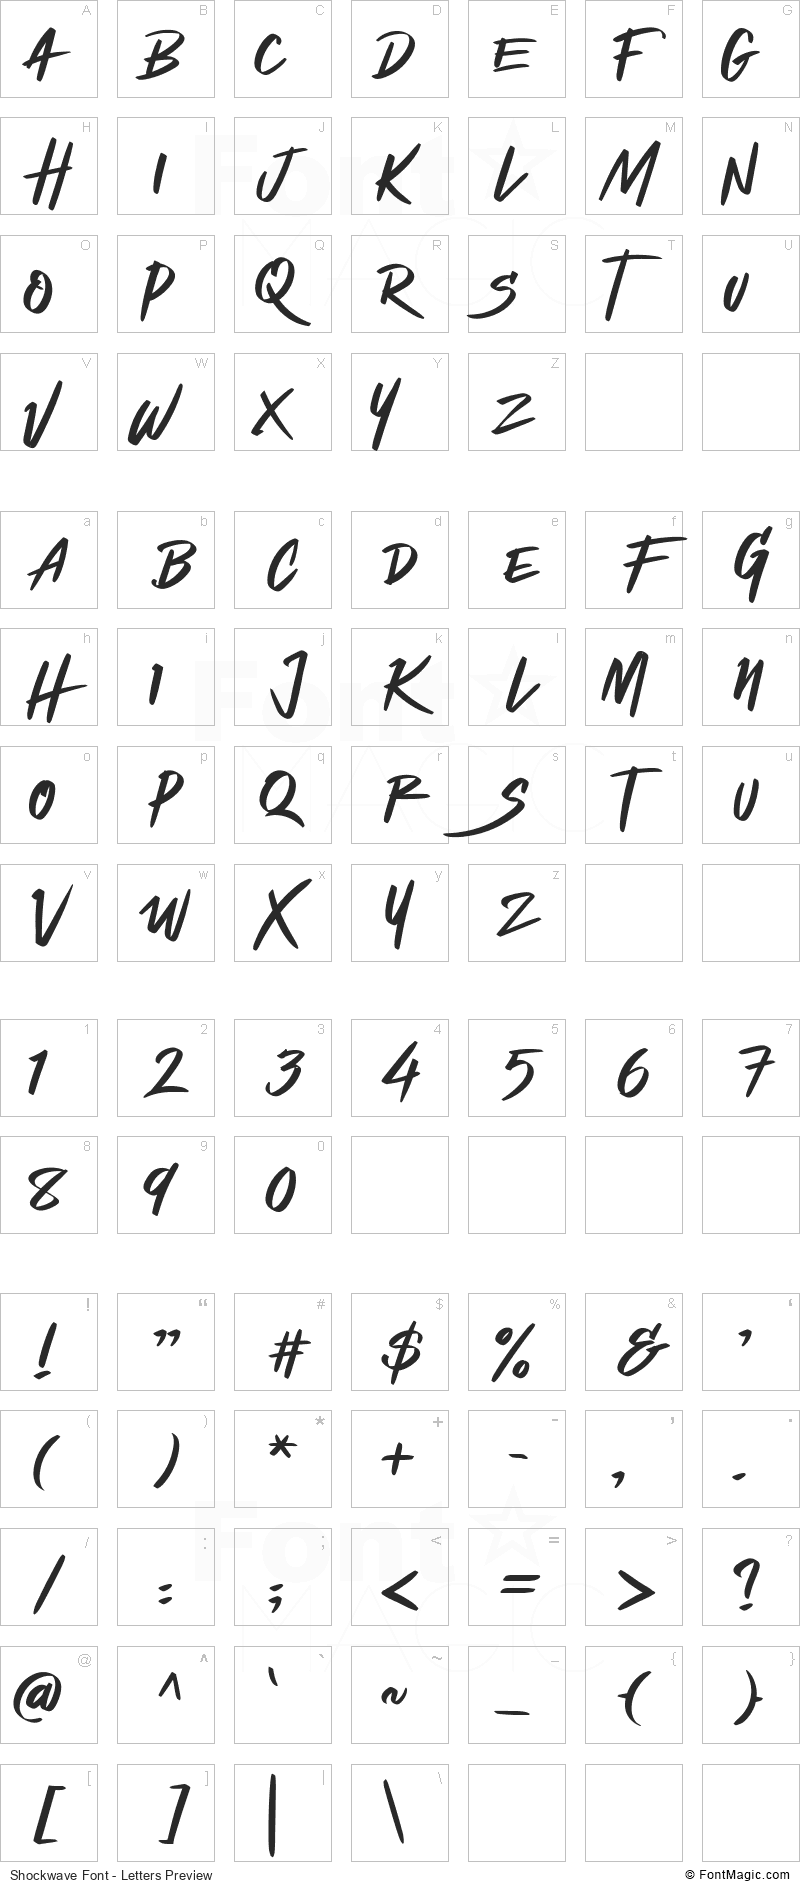 Shockwave Font - All Latters Preview Chart